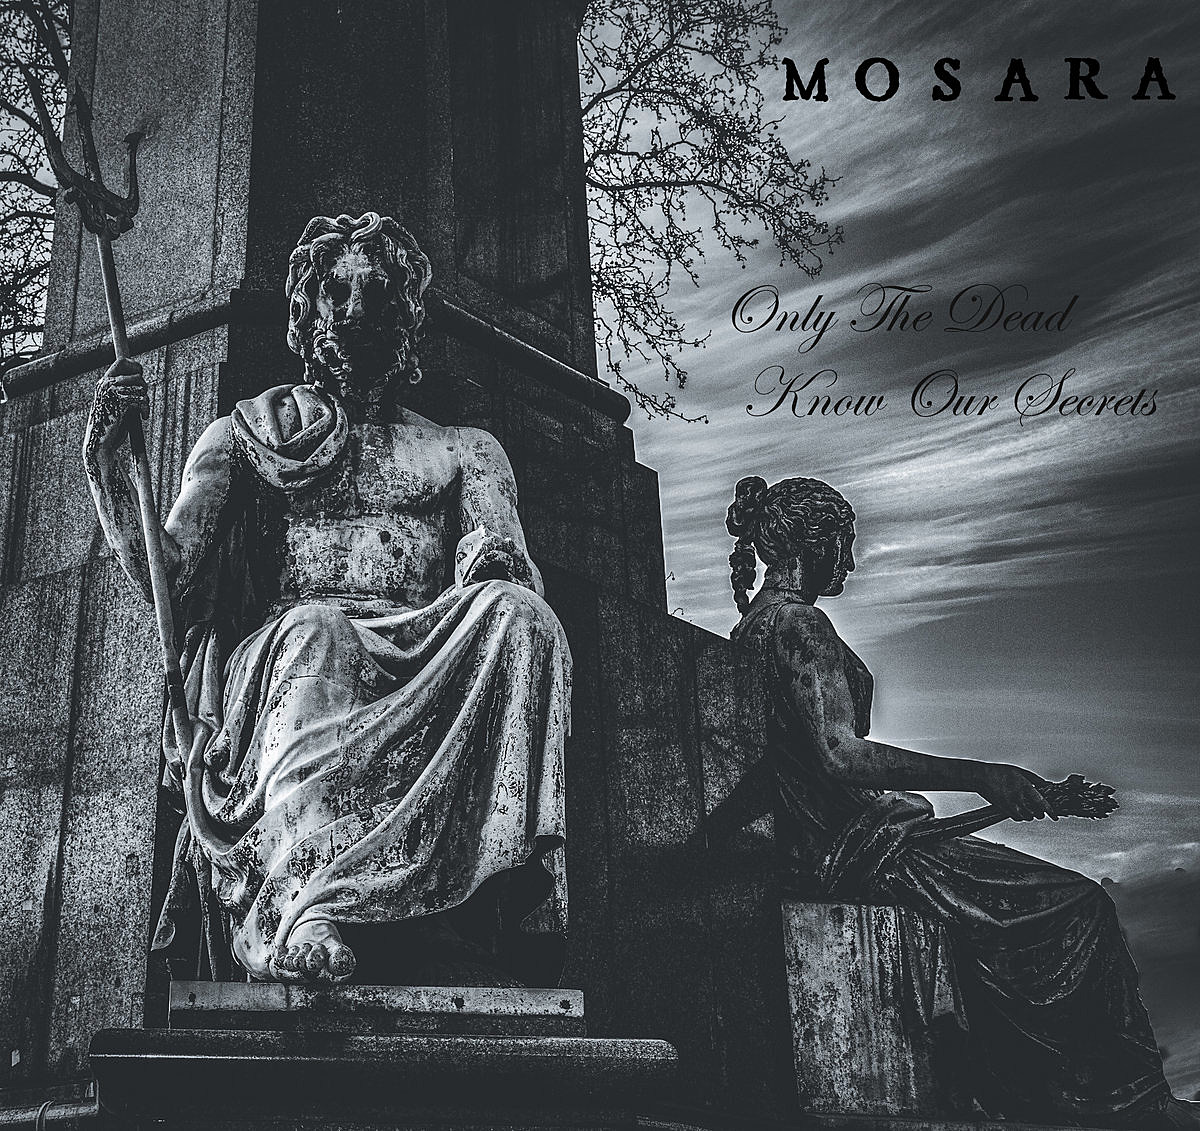 Mosara - Only the Dead Know Our Secrets